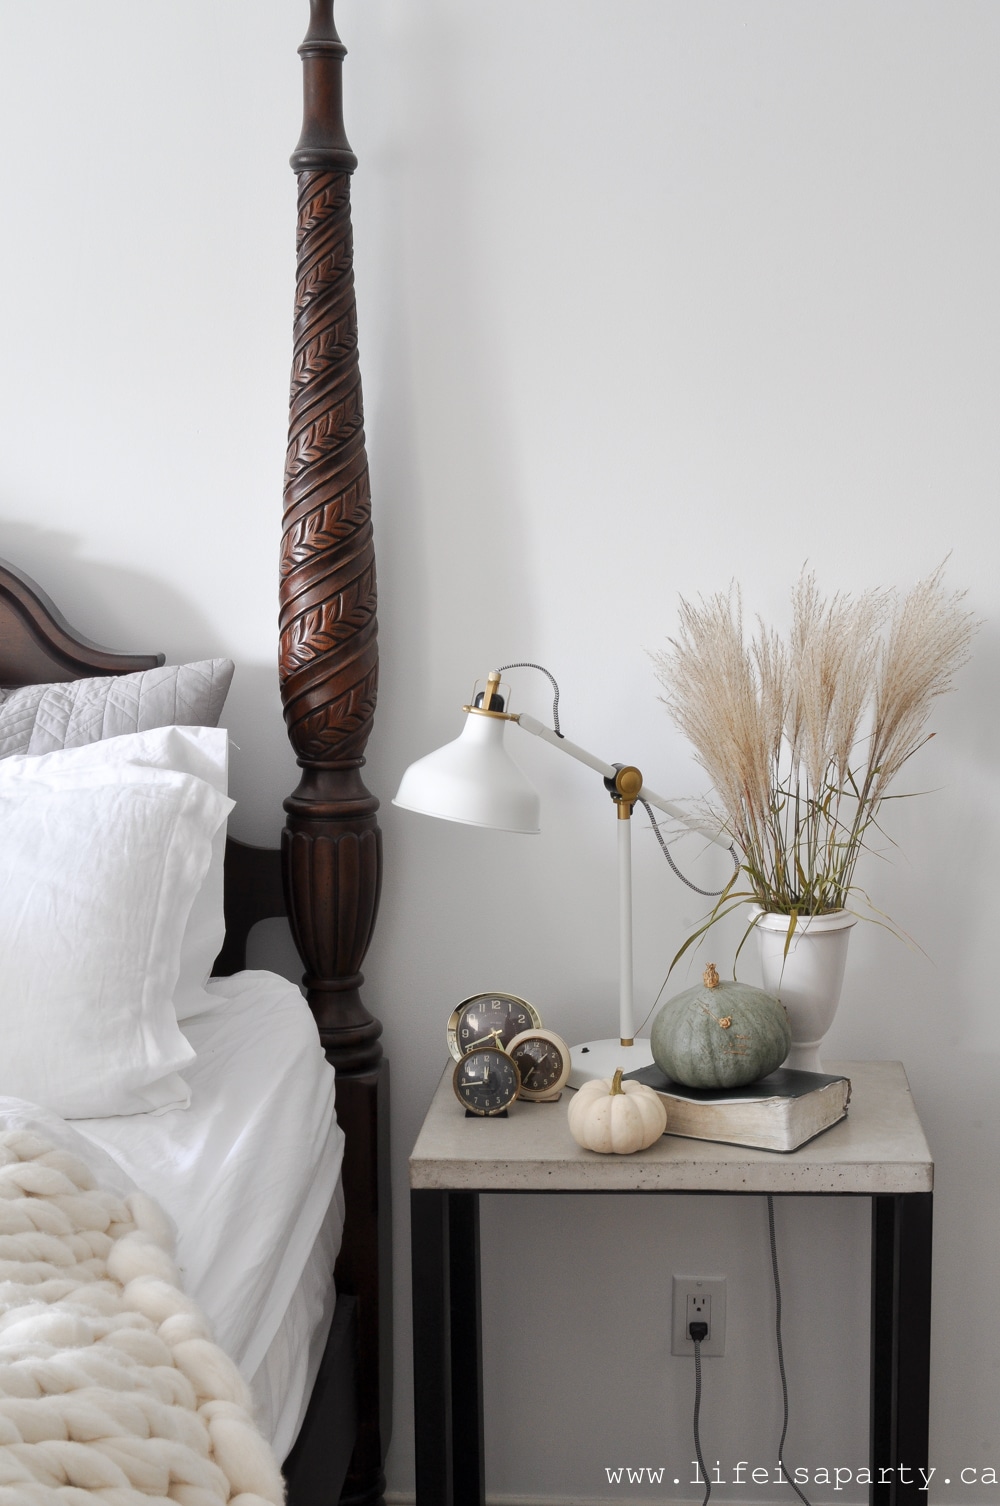 Cozy Fall Bedroom: 5 simple ways to make your bedroom cozy for fall, like candles, layers, books, natural elements, and neutral decor.